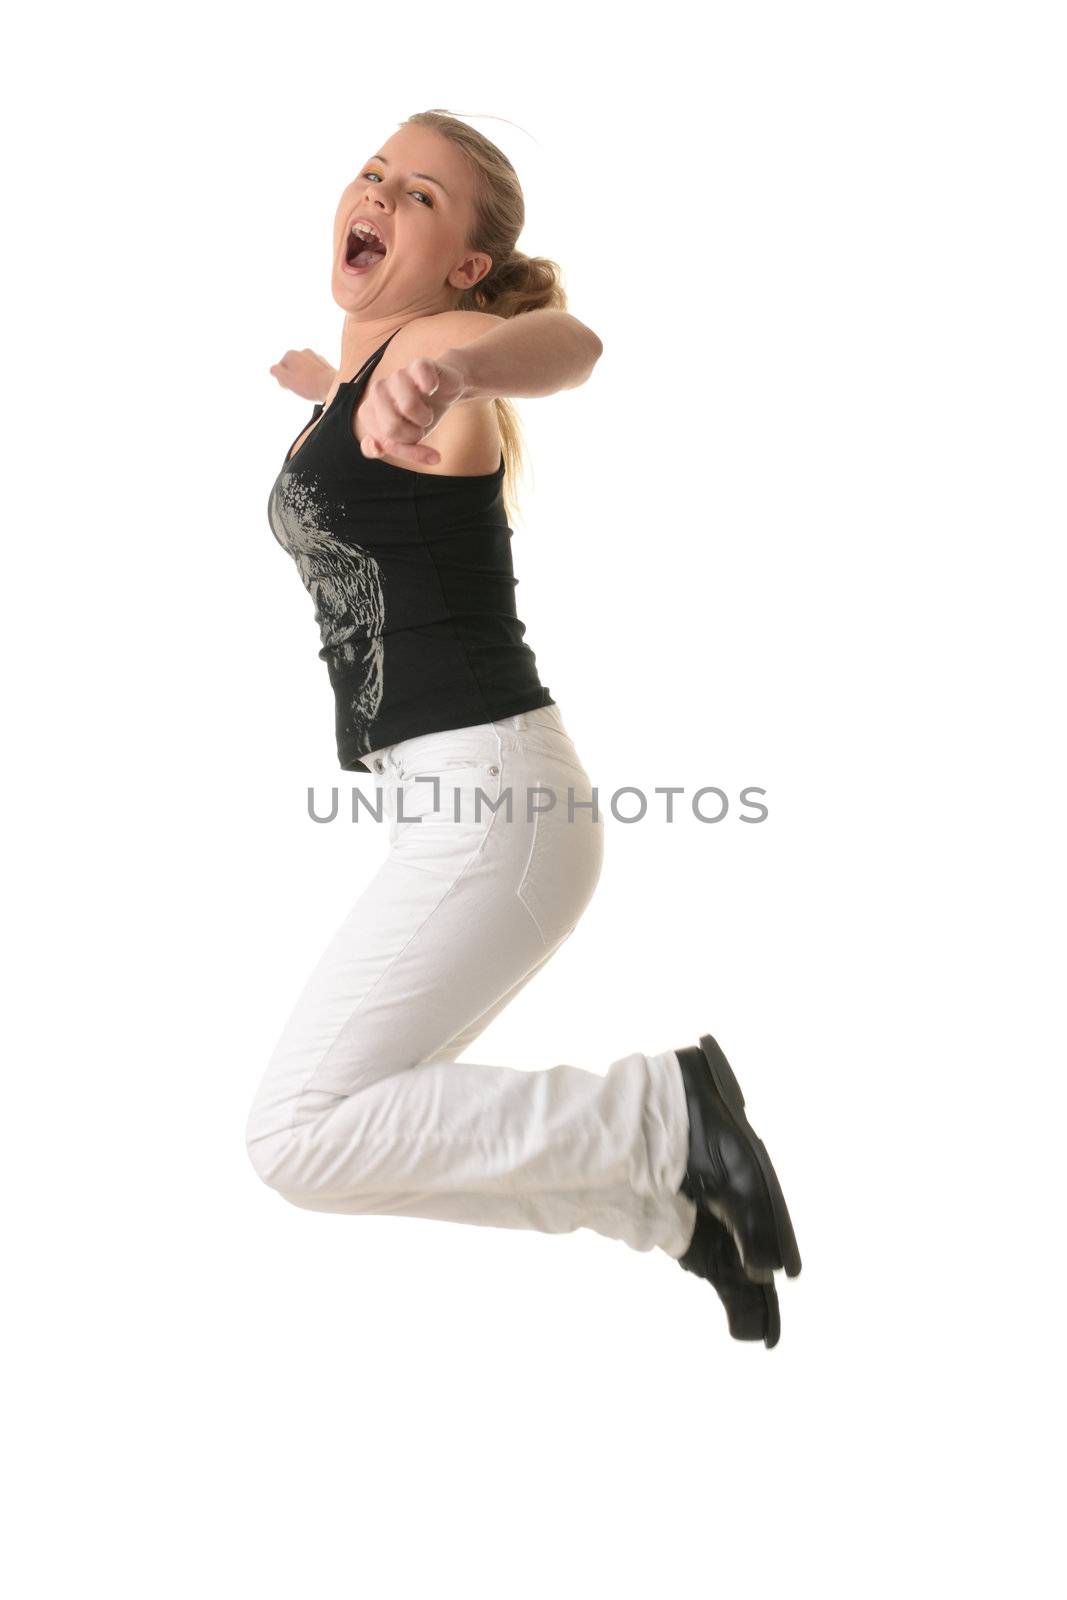 Beautiful woman jumping by BDS